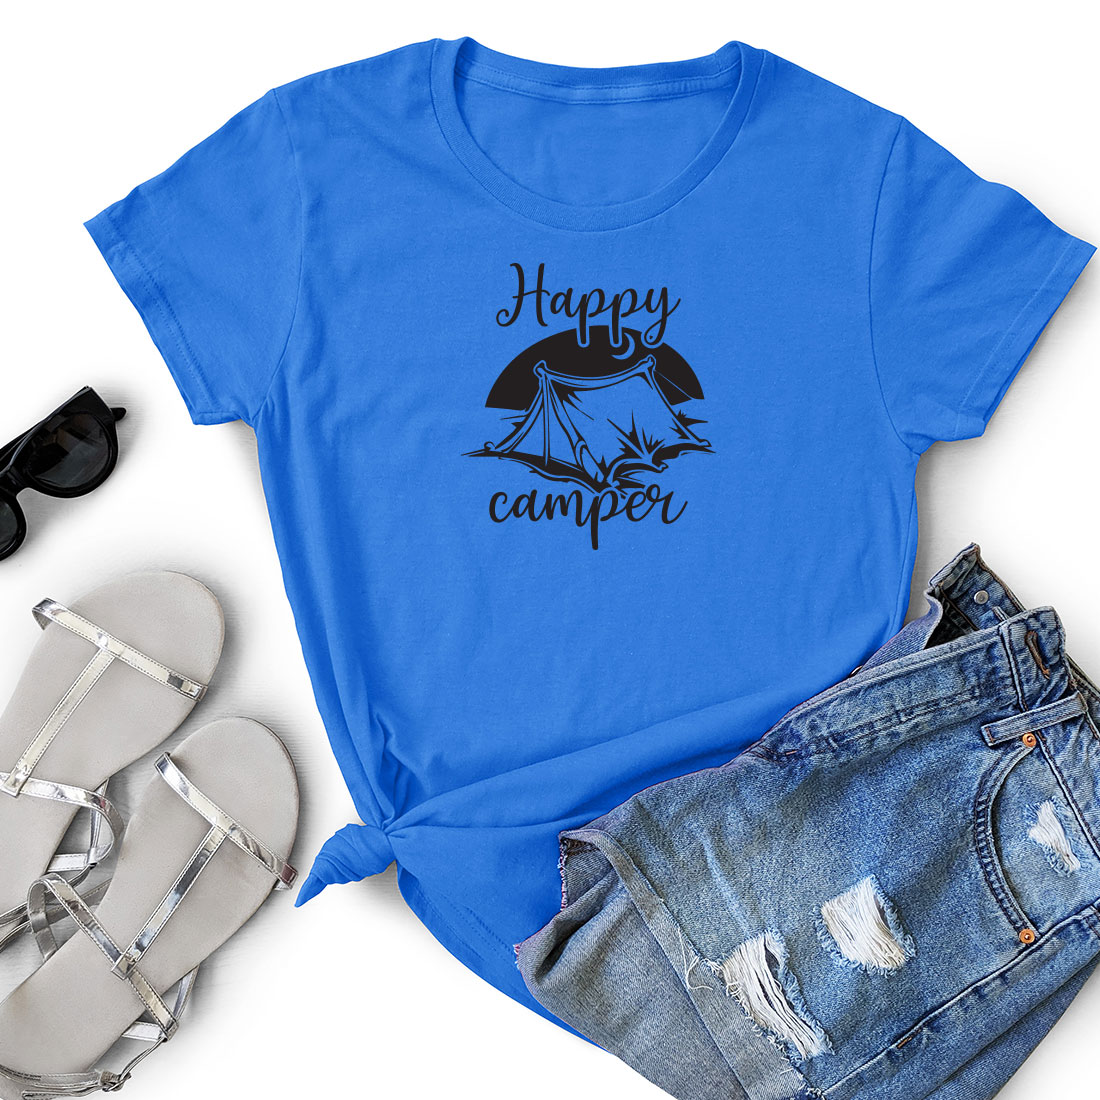 T - shirt that says happy camper next to a pair of shorts.